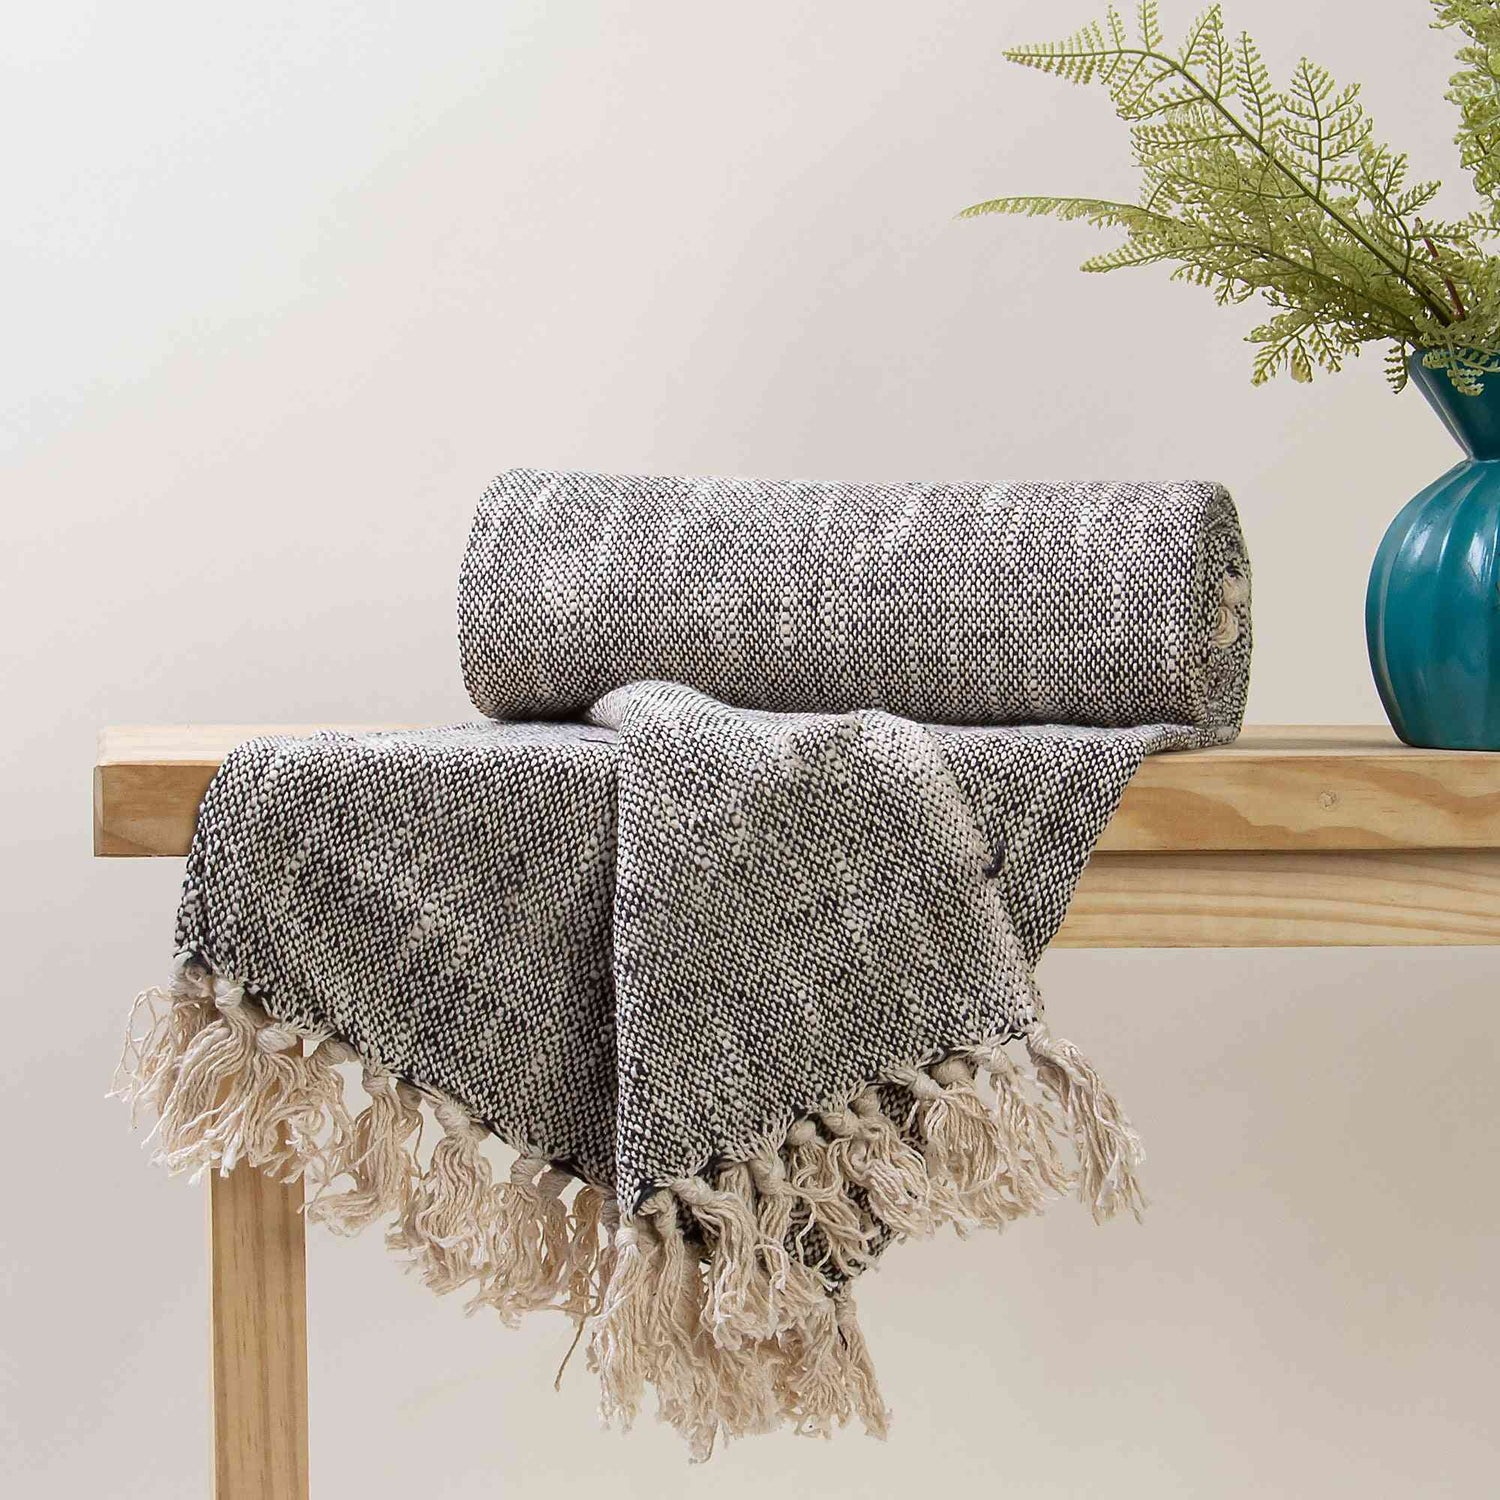 Throws Blankets Cotton For Living Room Couch Decor Online